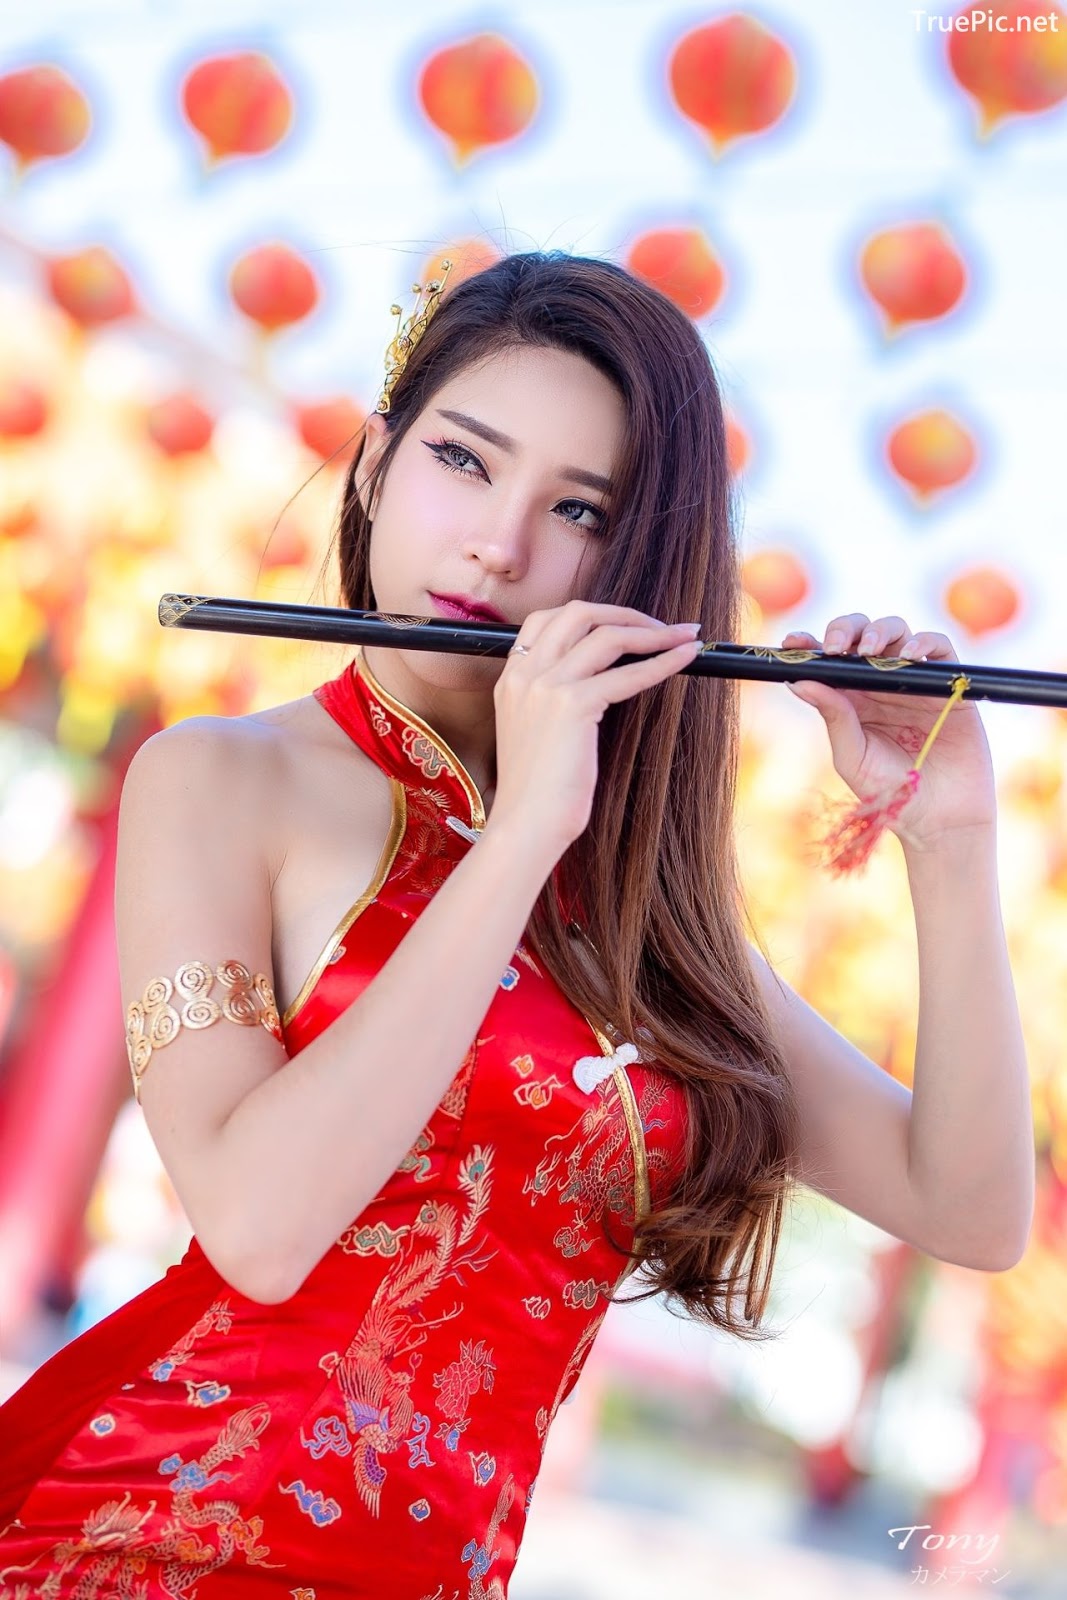 Image-Thailand-Hot-Model-Janet-Kanokwan-Saesim-Sexy-Chinese-Girl-Red-Dress-Traditional-TruePic.net- Picture-5